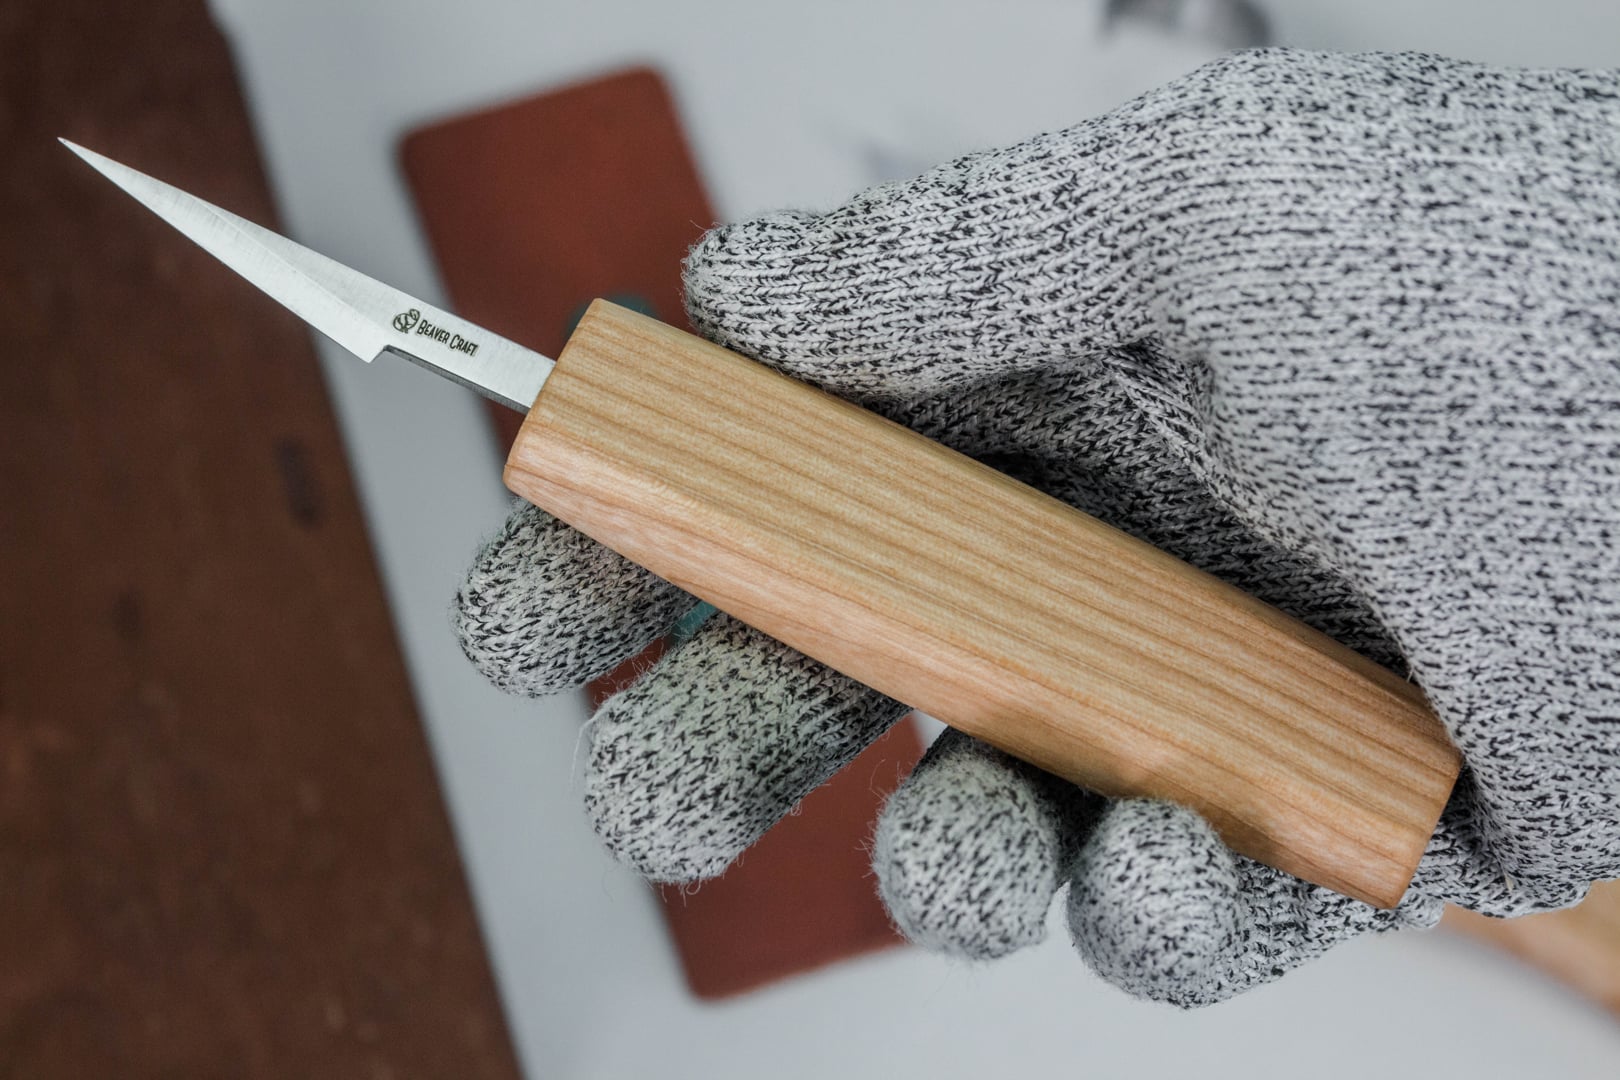 Draw Knife | Wood Carving Tools | 4.3Drawknife woodworking tool Whittling  Tools let Wood Carving More Perfect and Easy,Really Sharp